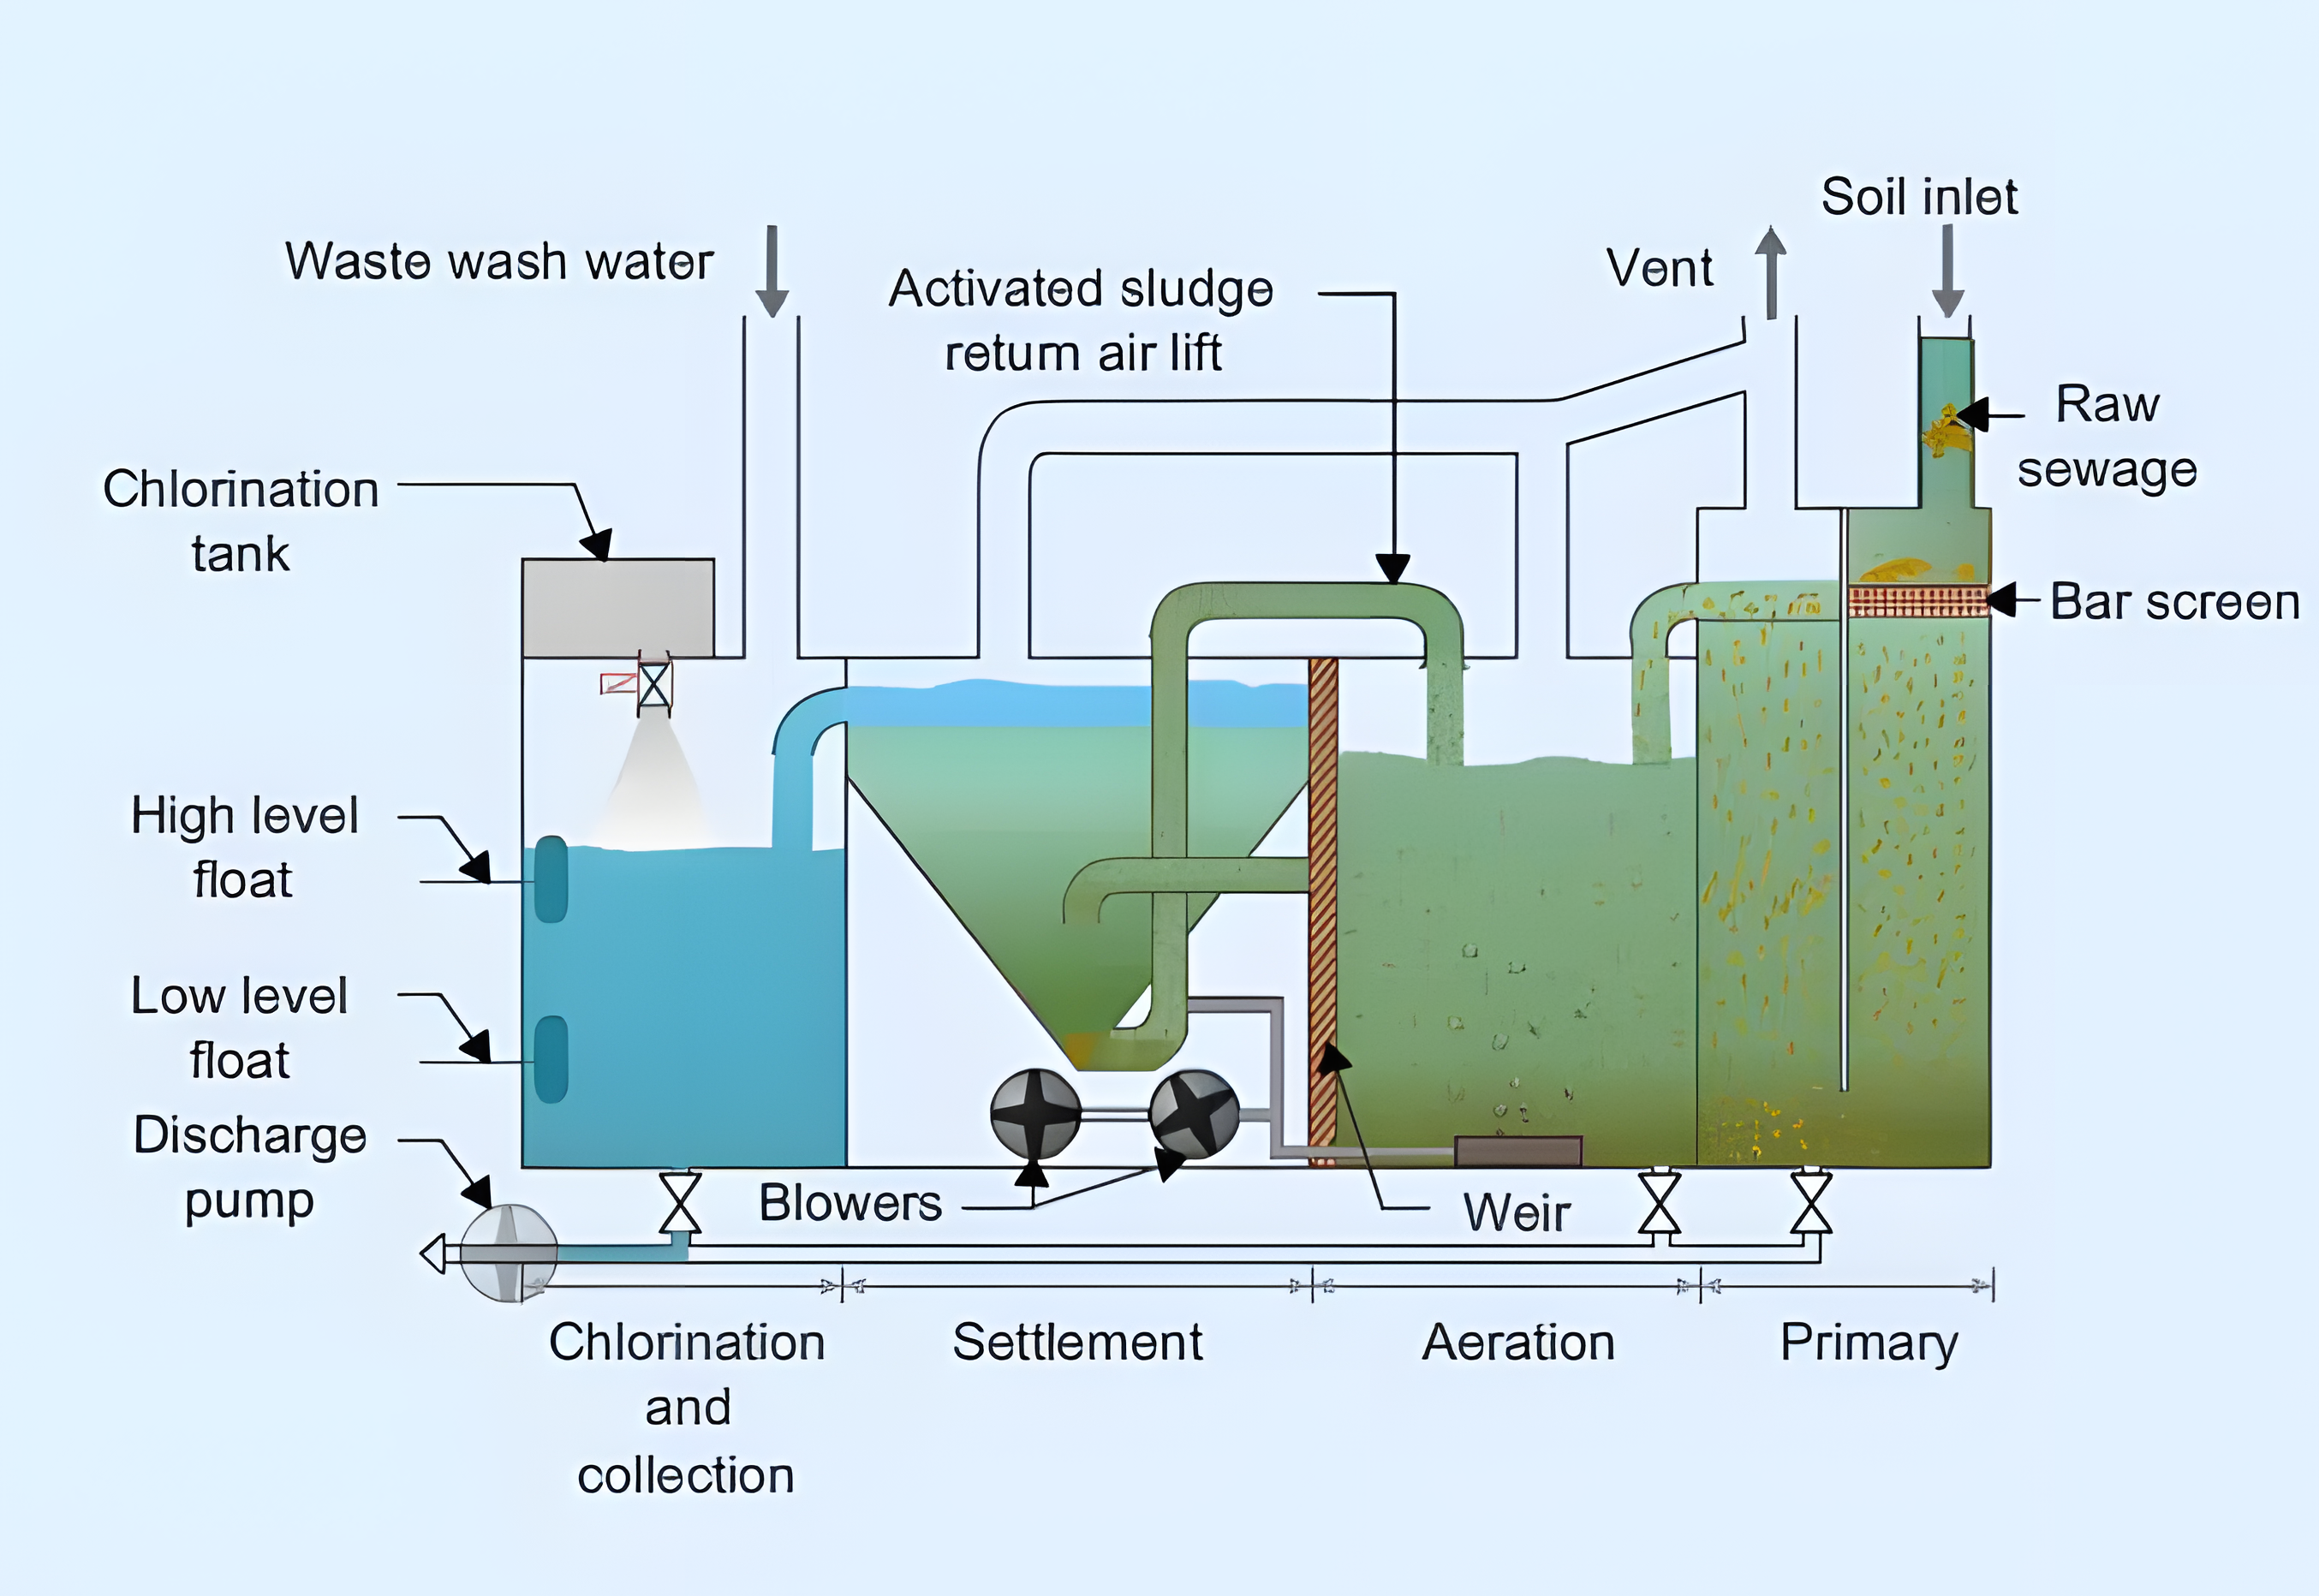 How do you remove water from sewage sludge?